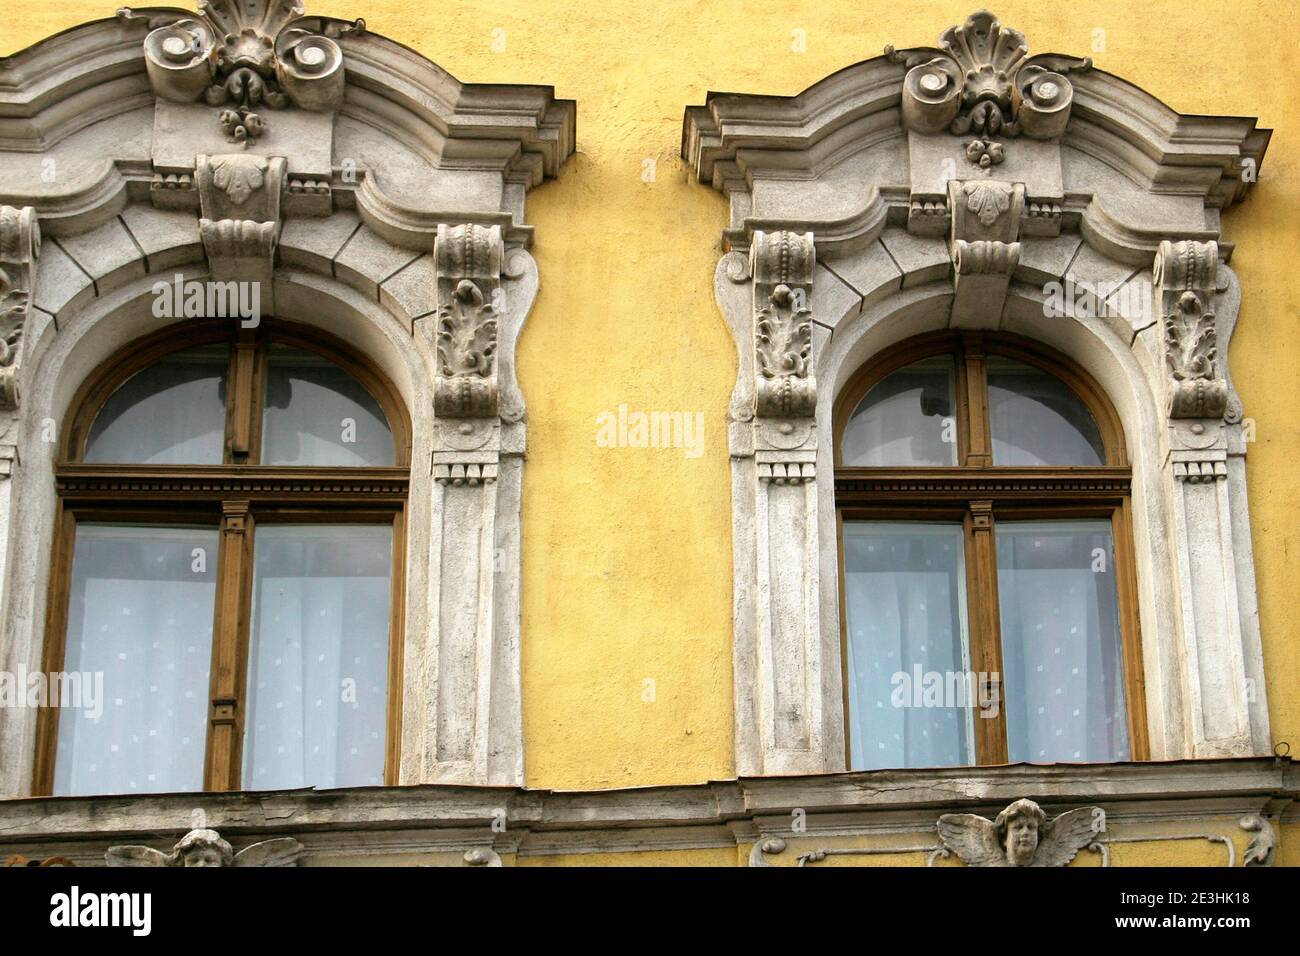 Architectural details on a 19th century building in Oradea, Romania Stock Photo